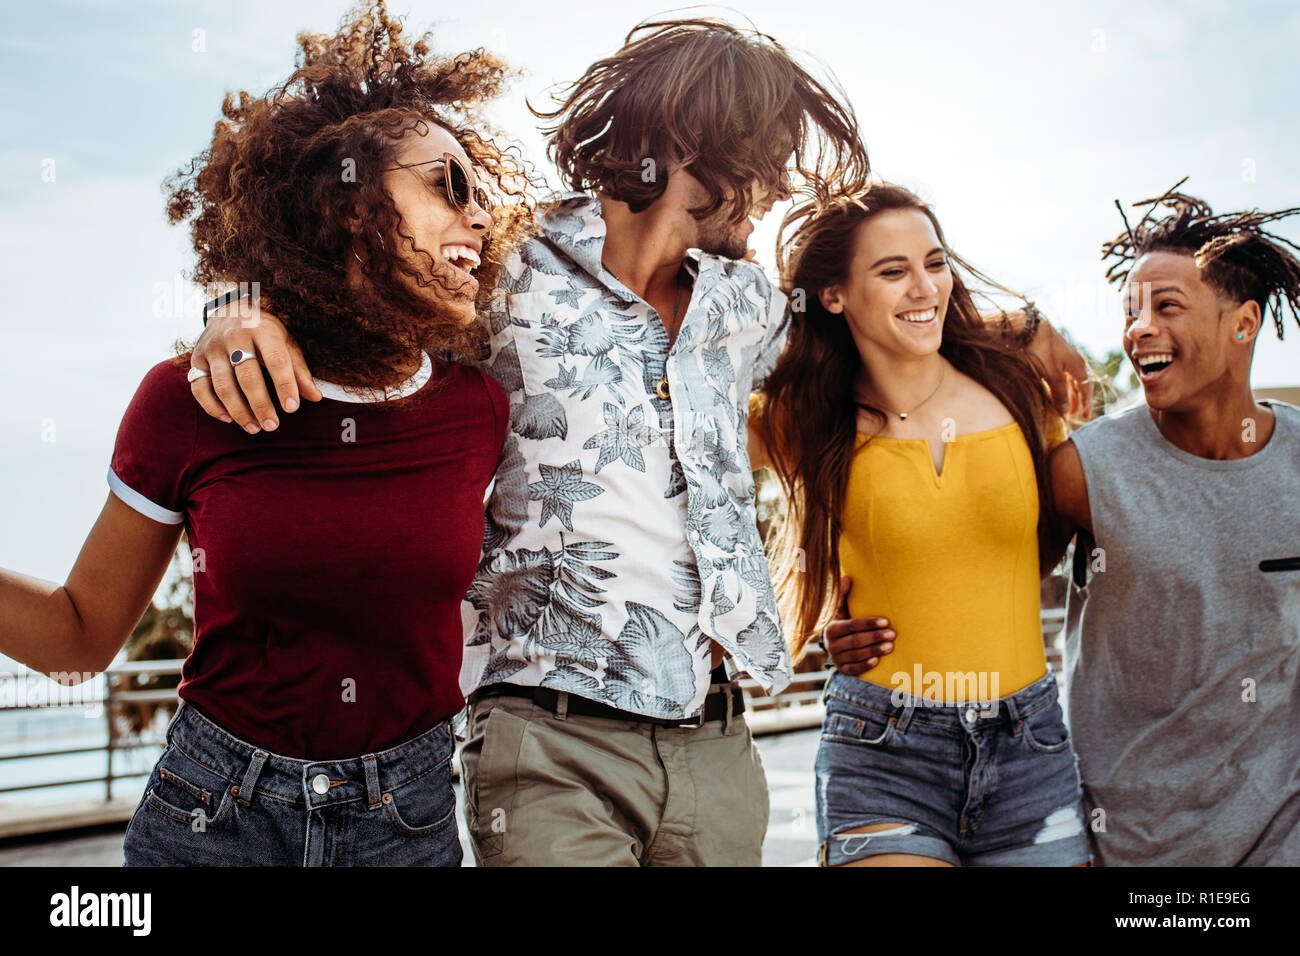 Four young people walking outdoors together. Group of multi-ethnic men and women having fun outdoors. Stock Photo